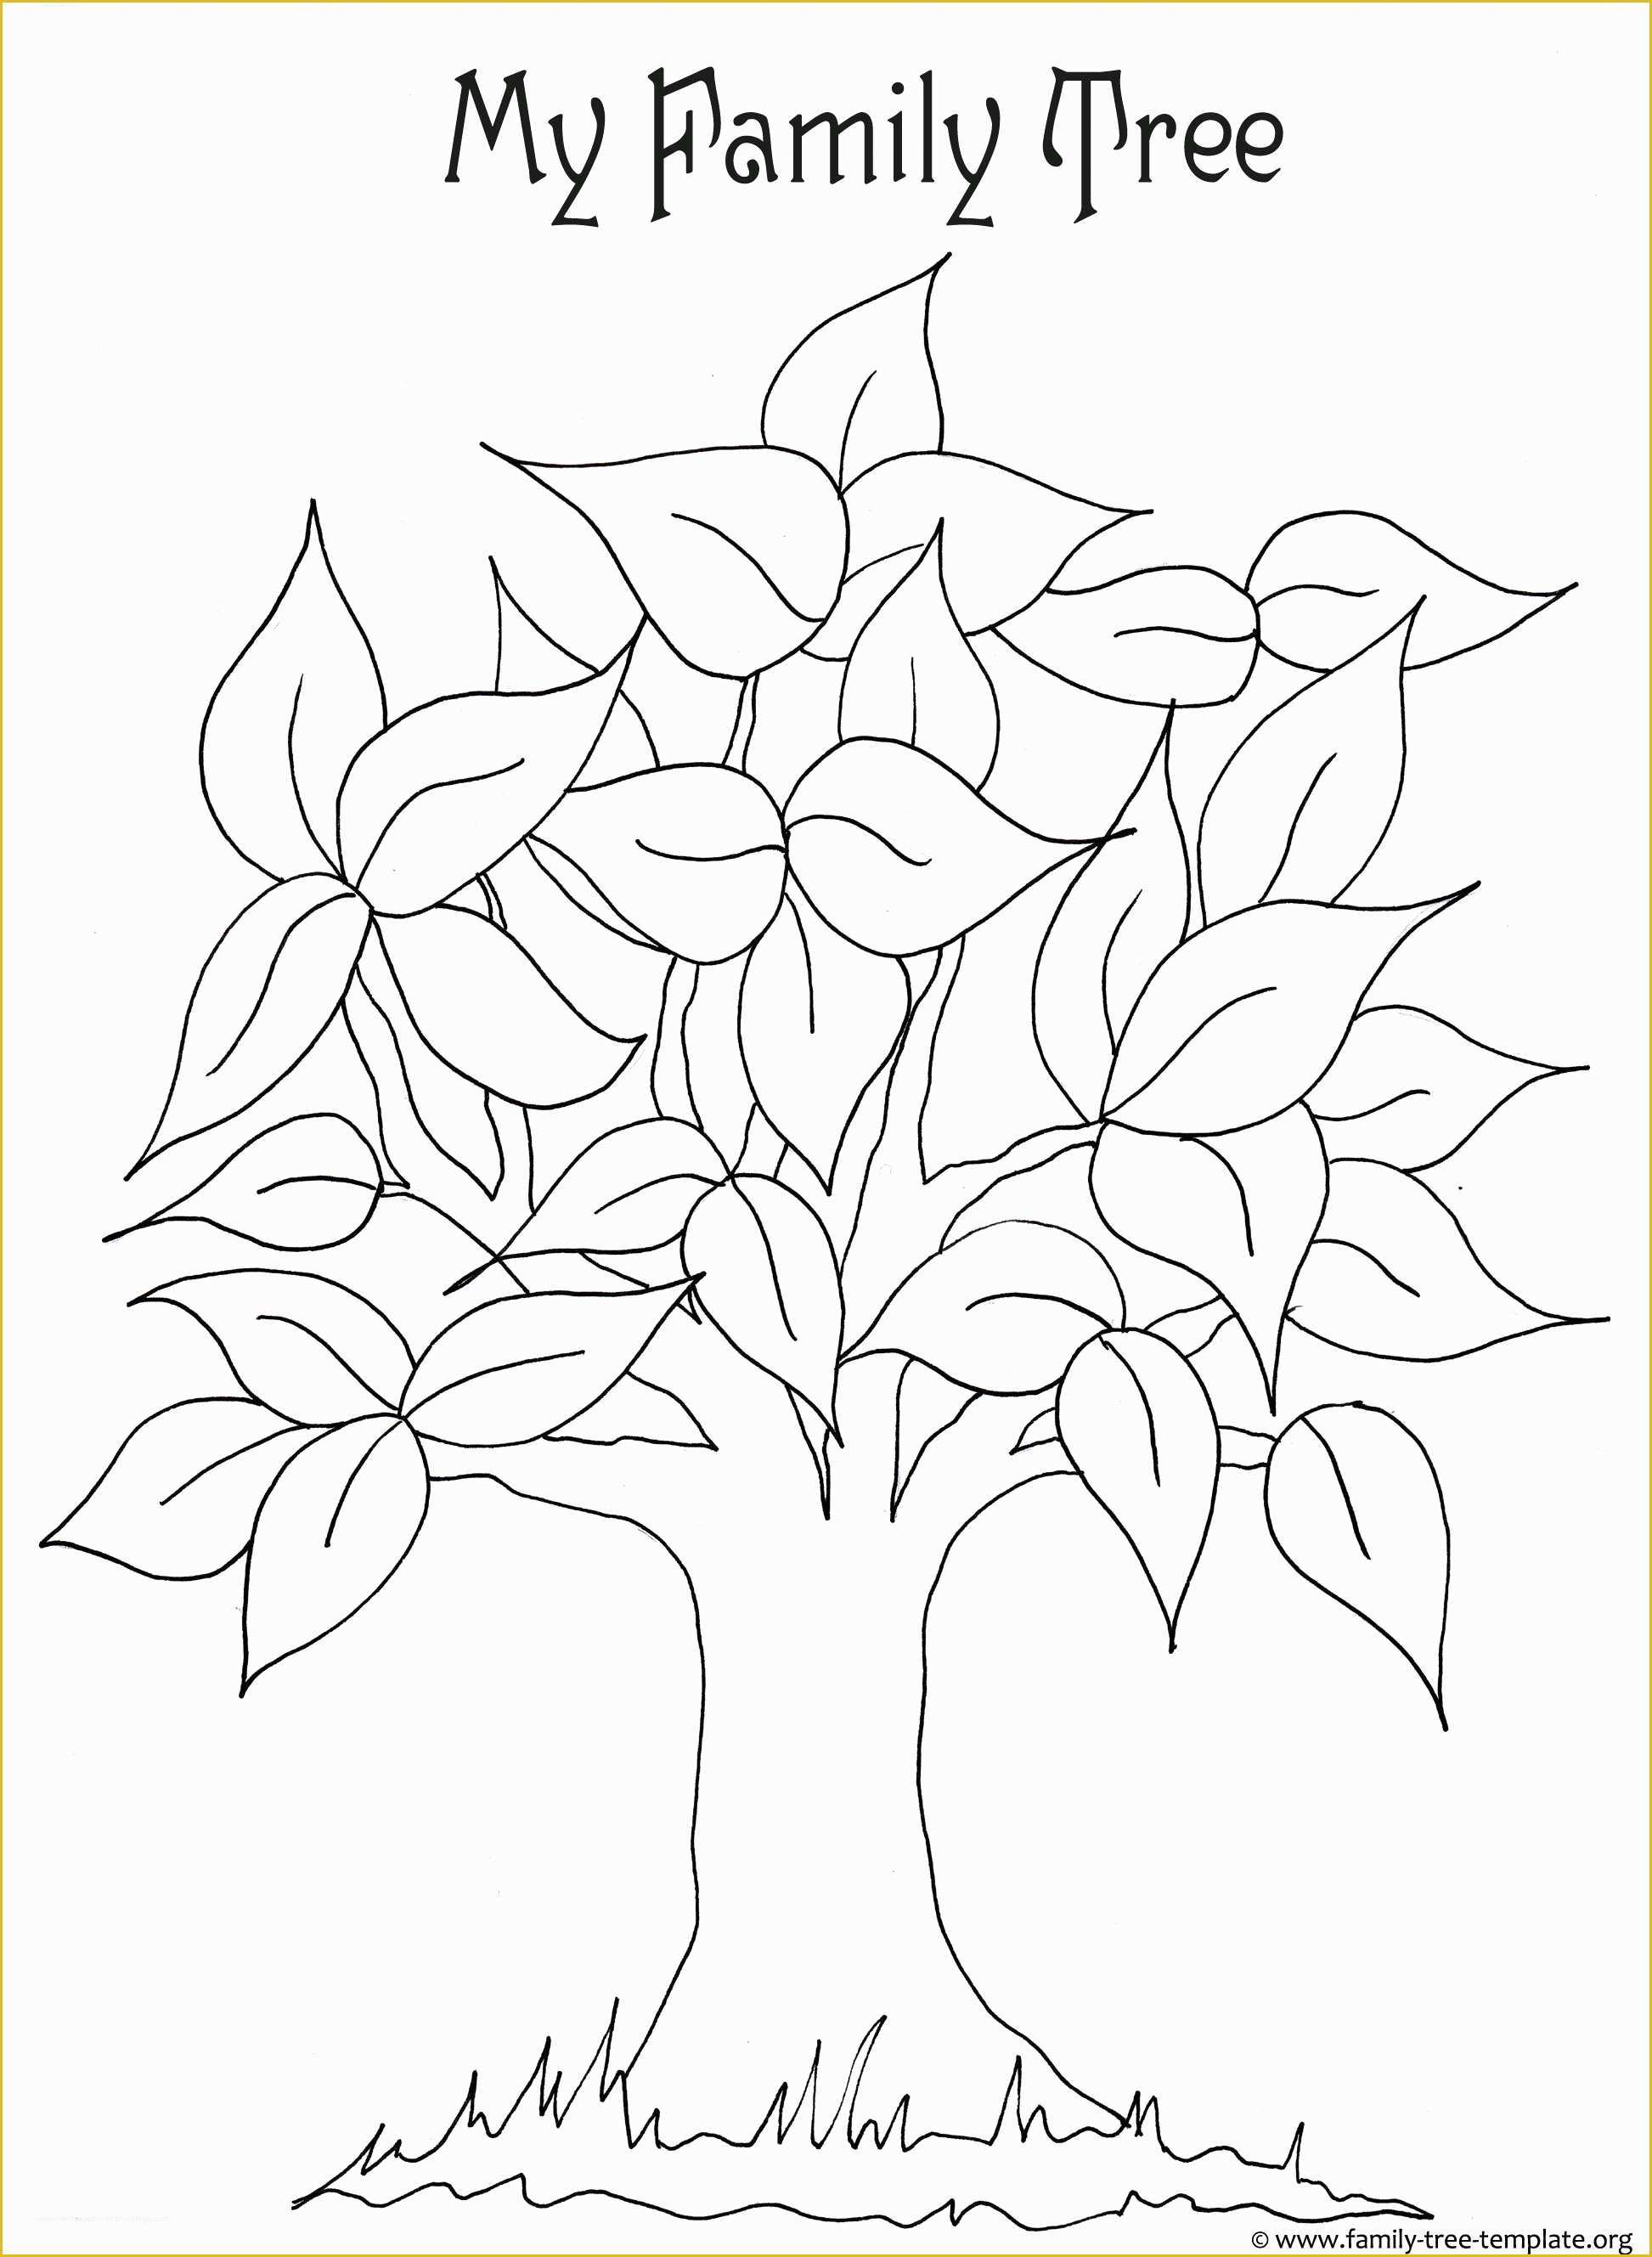 Free Picture Templates Of Family Tree Templates & Genealogy Clipart for Your